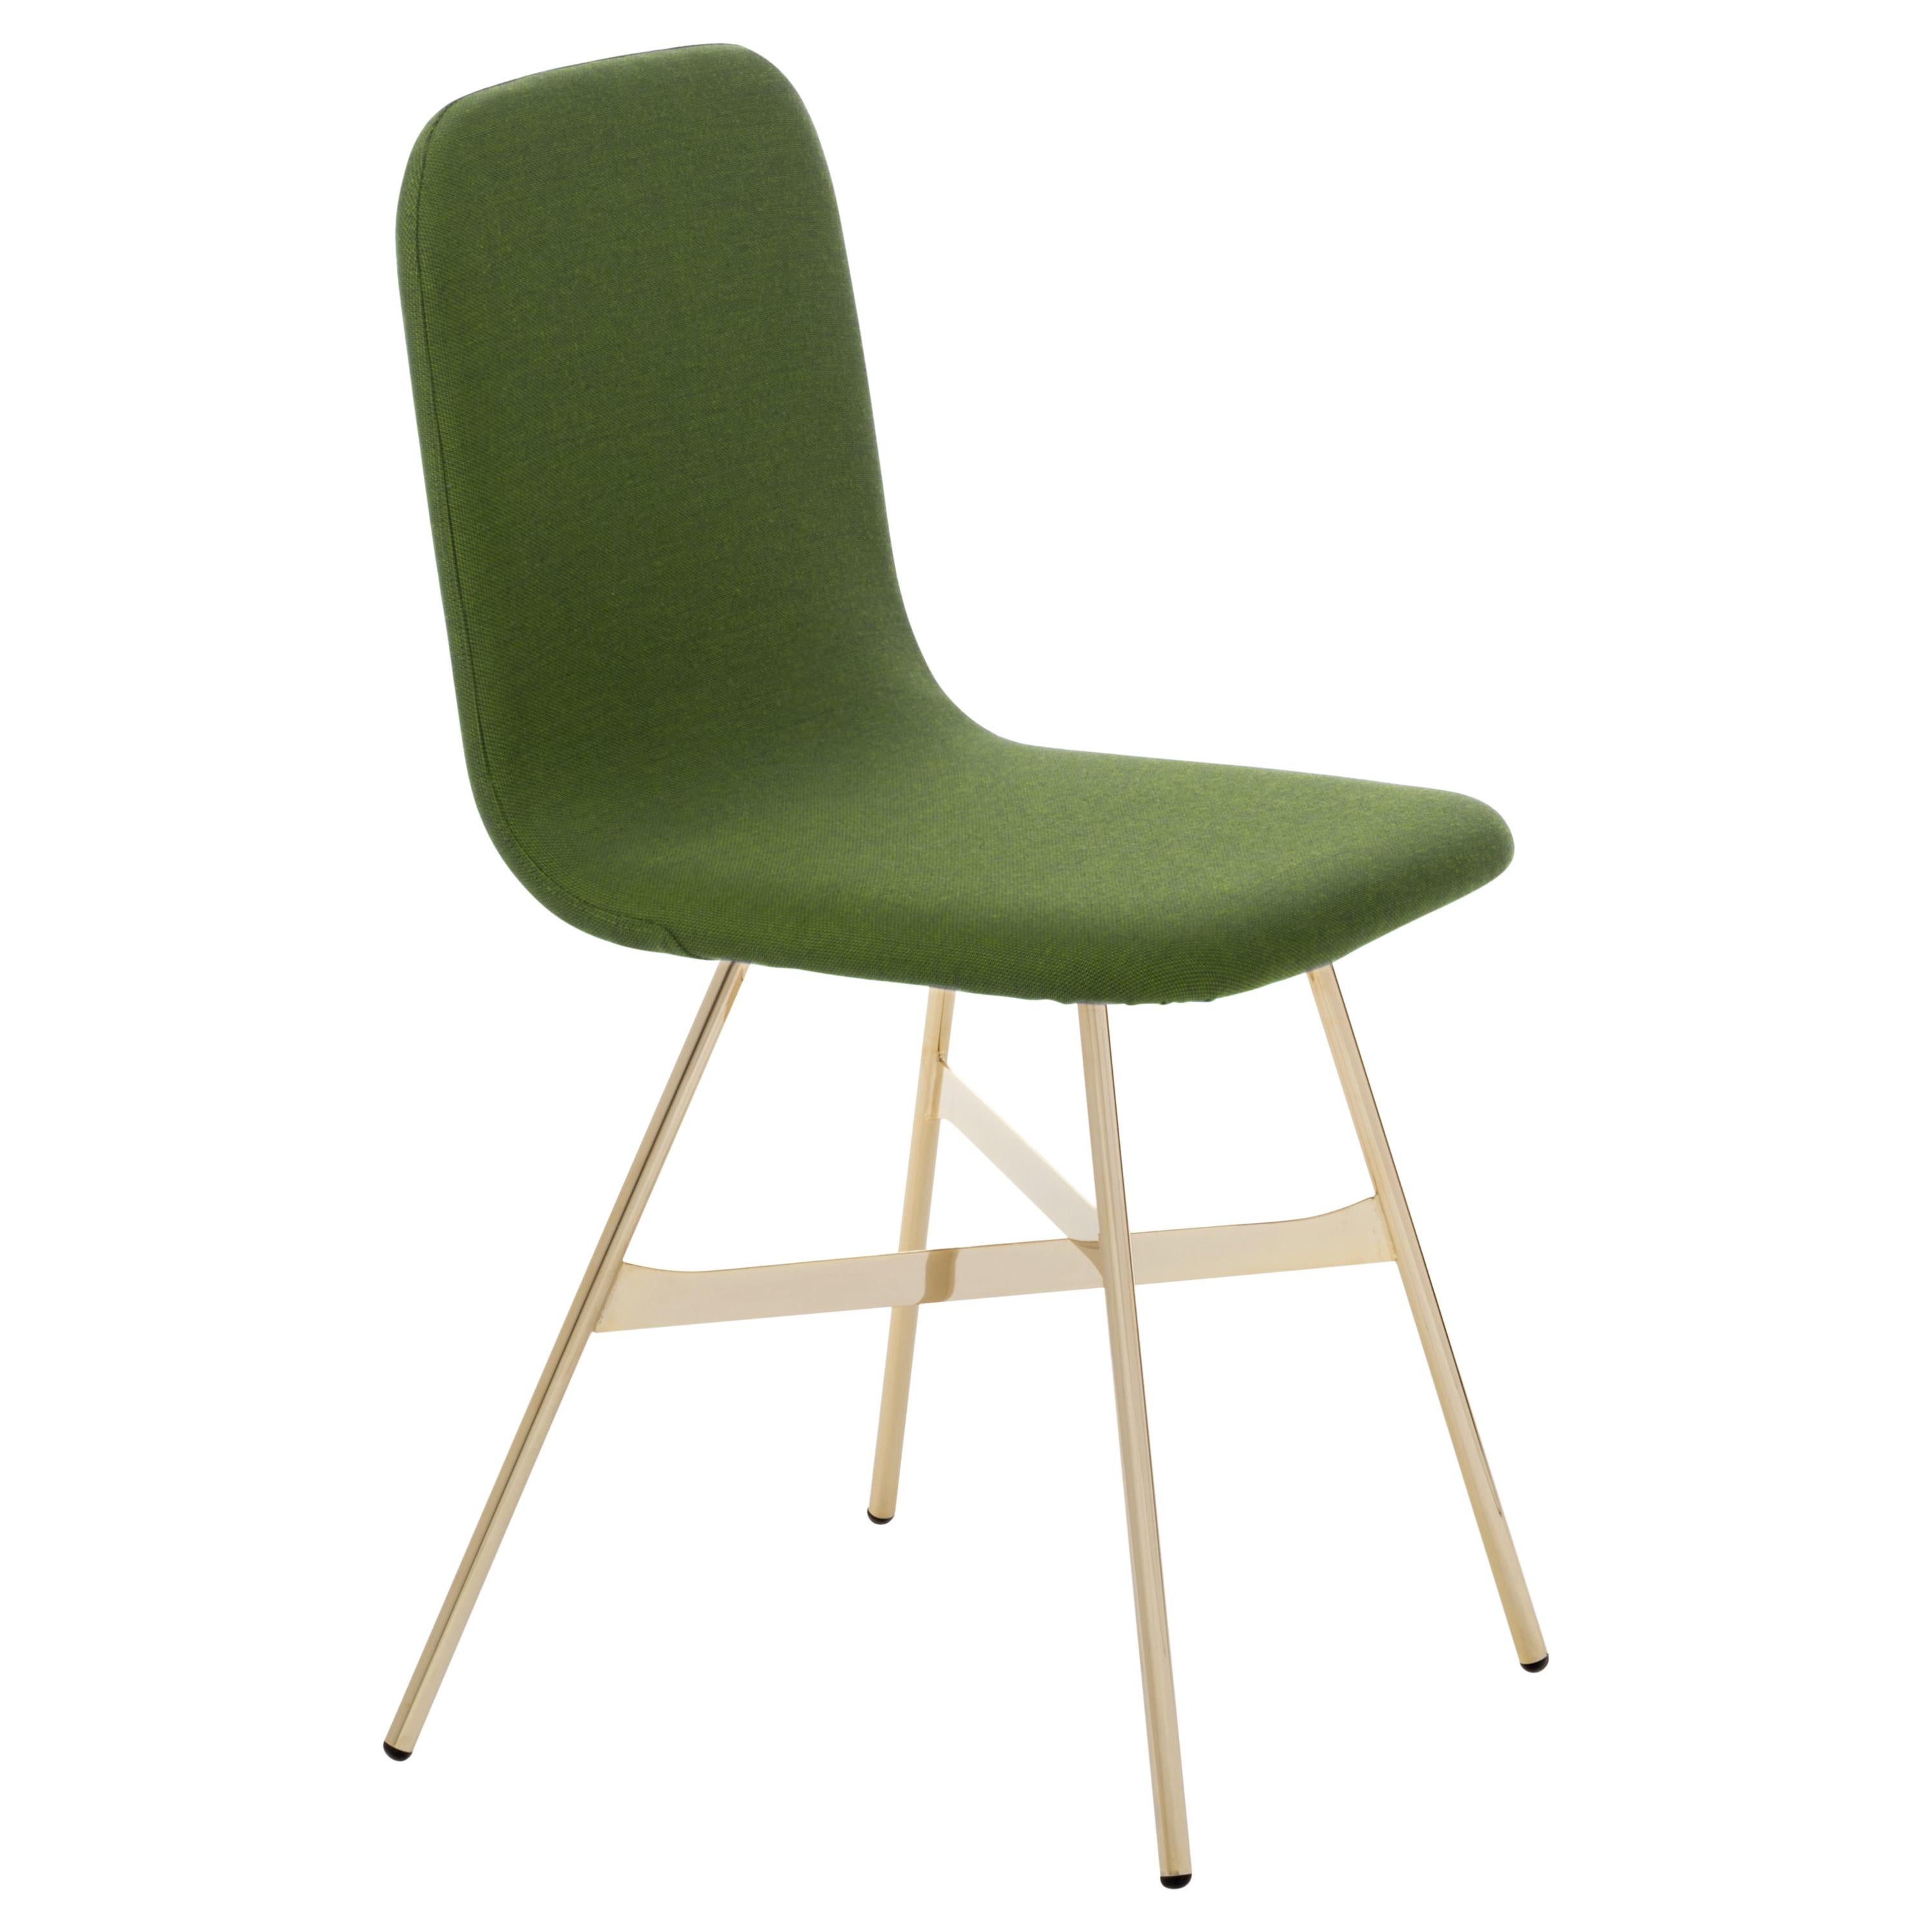 Tria Simple Chair Golden Legs Upholstered in Fine Palm Green Wool, Made in Italy